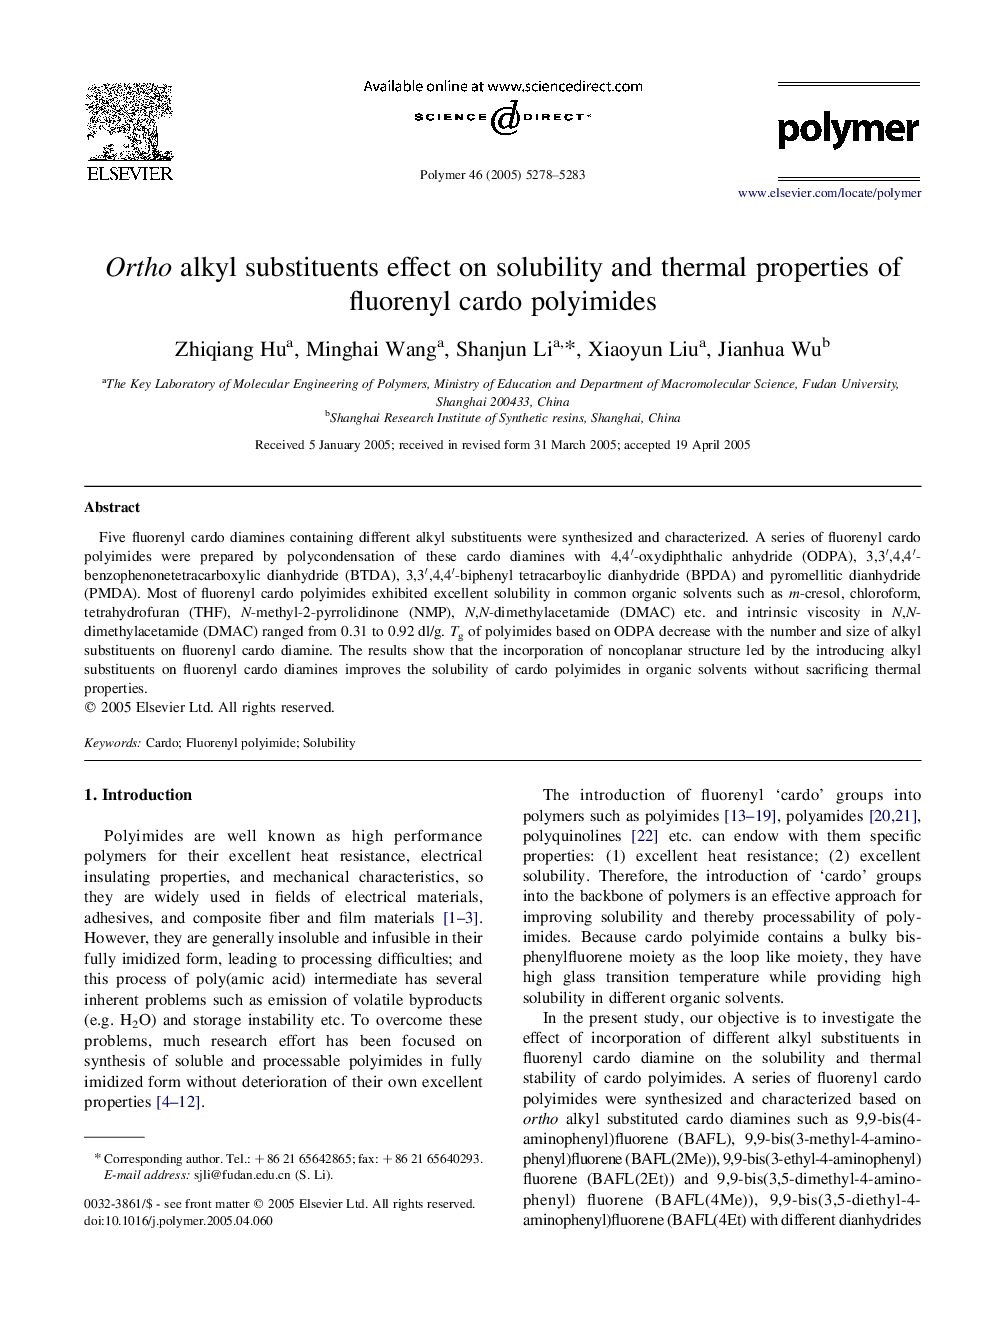 Ortho alkyl substituents effect on solubility and thermal properties of fluorenyl cardo polyimides